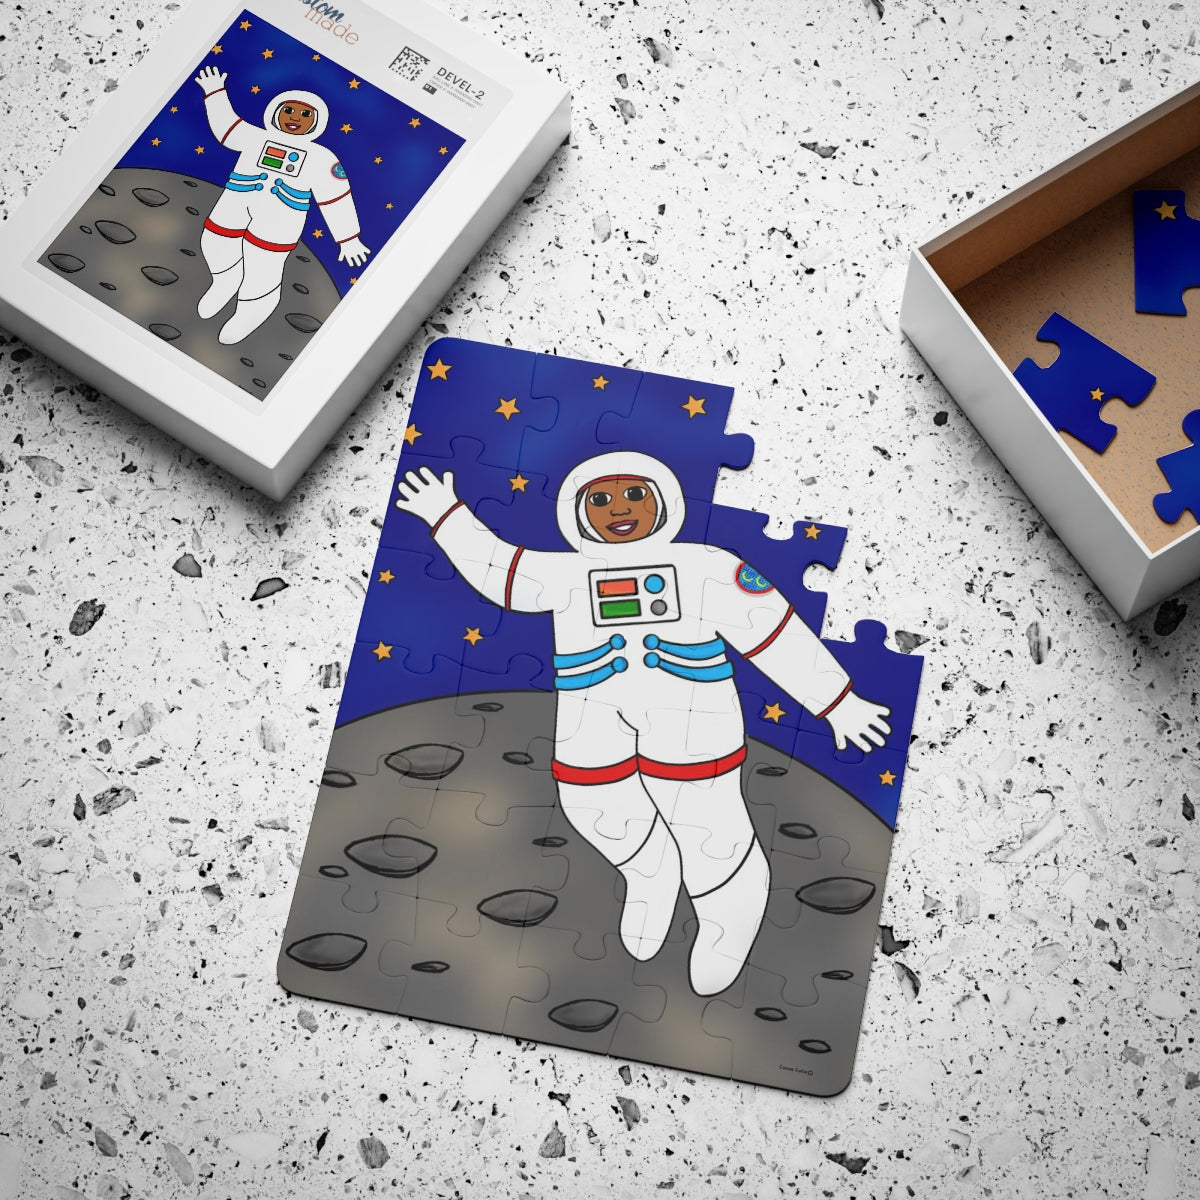 Astronaut Girl Cocoa Cutie Kids' Puzzle, (Ages 3-5)